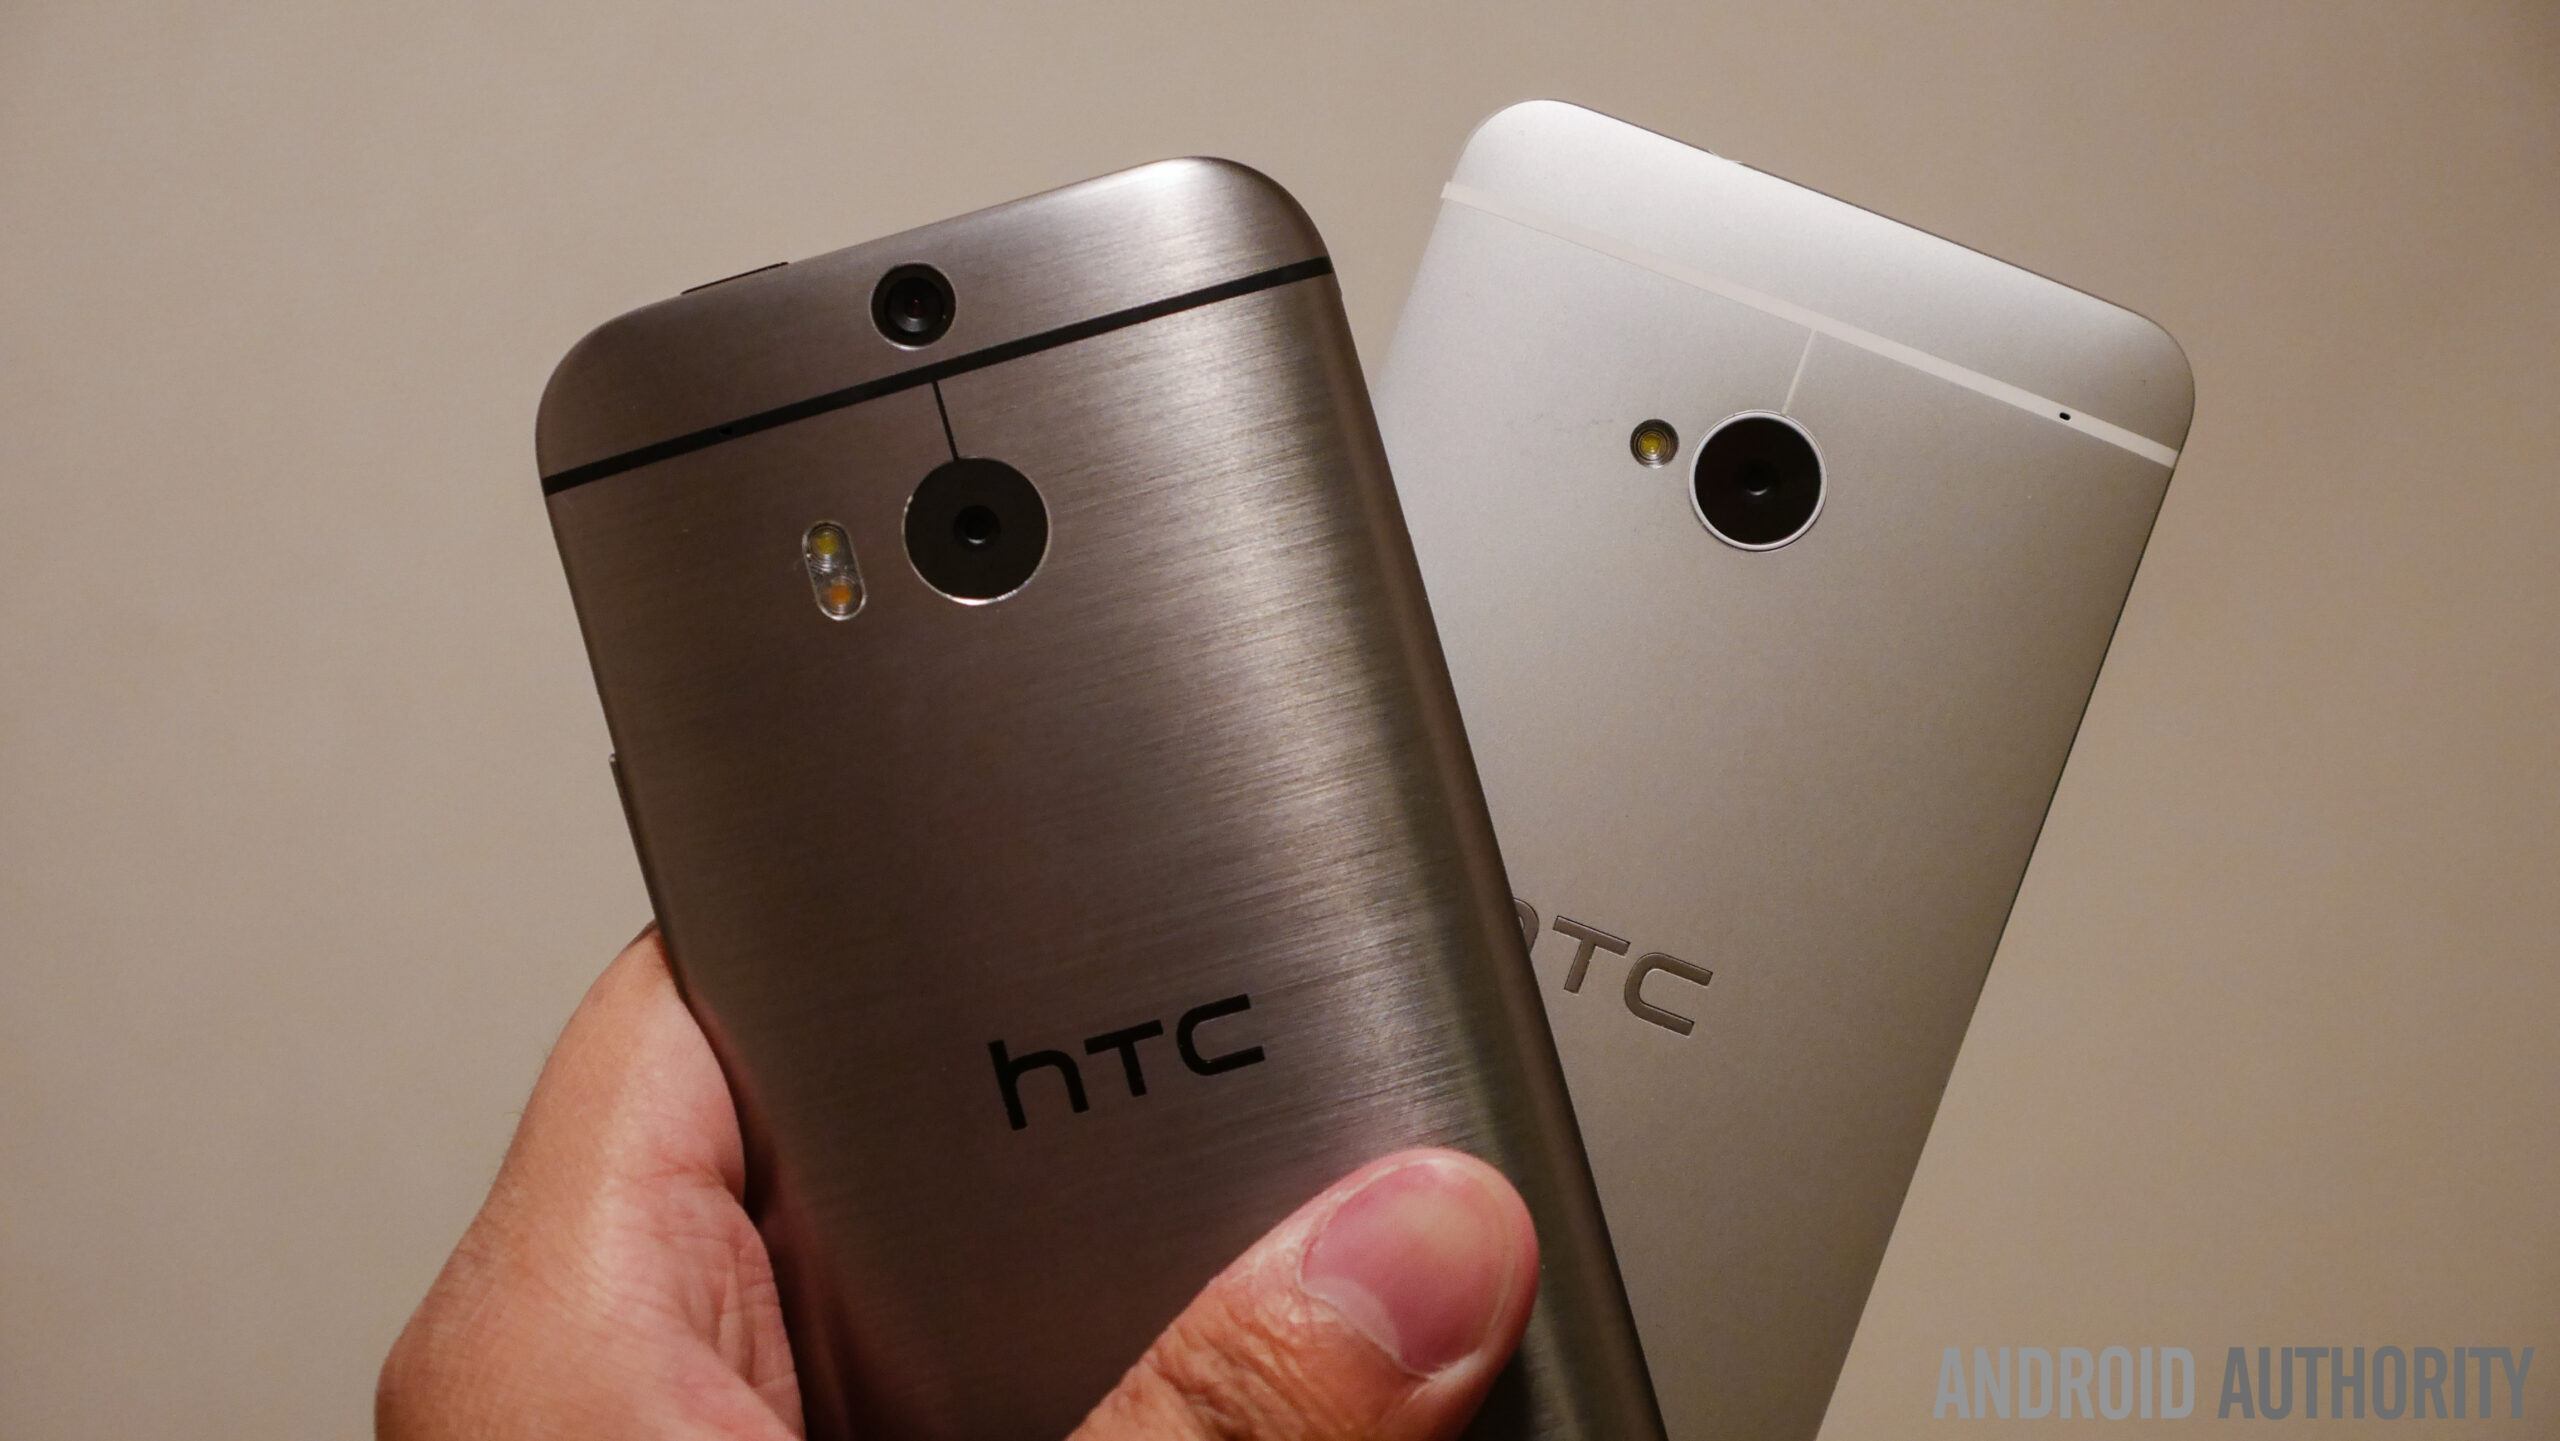 htc one m8 vs htc one m7 quick look aa (15 of 19)